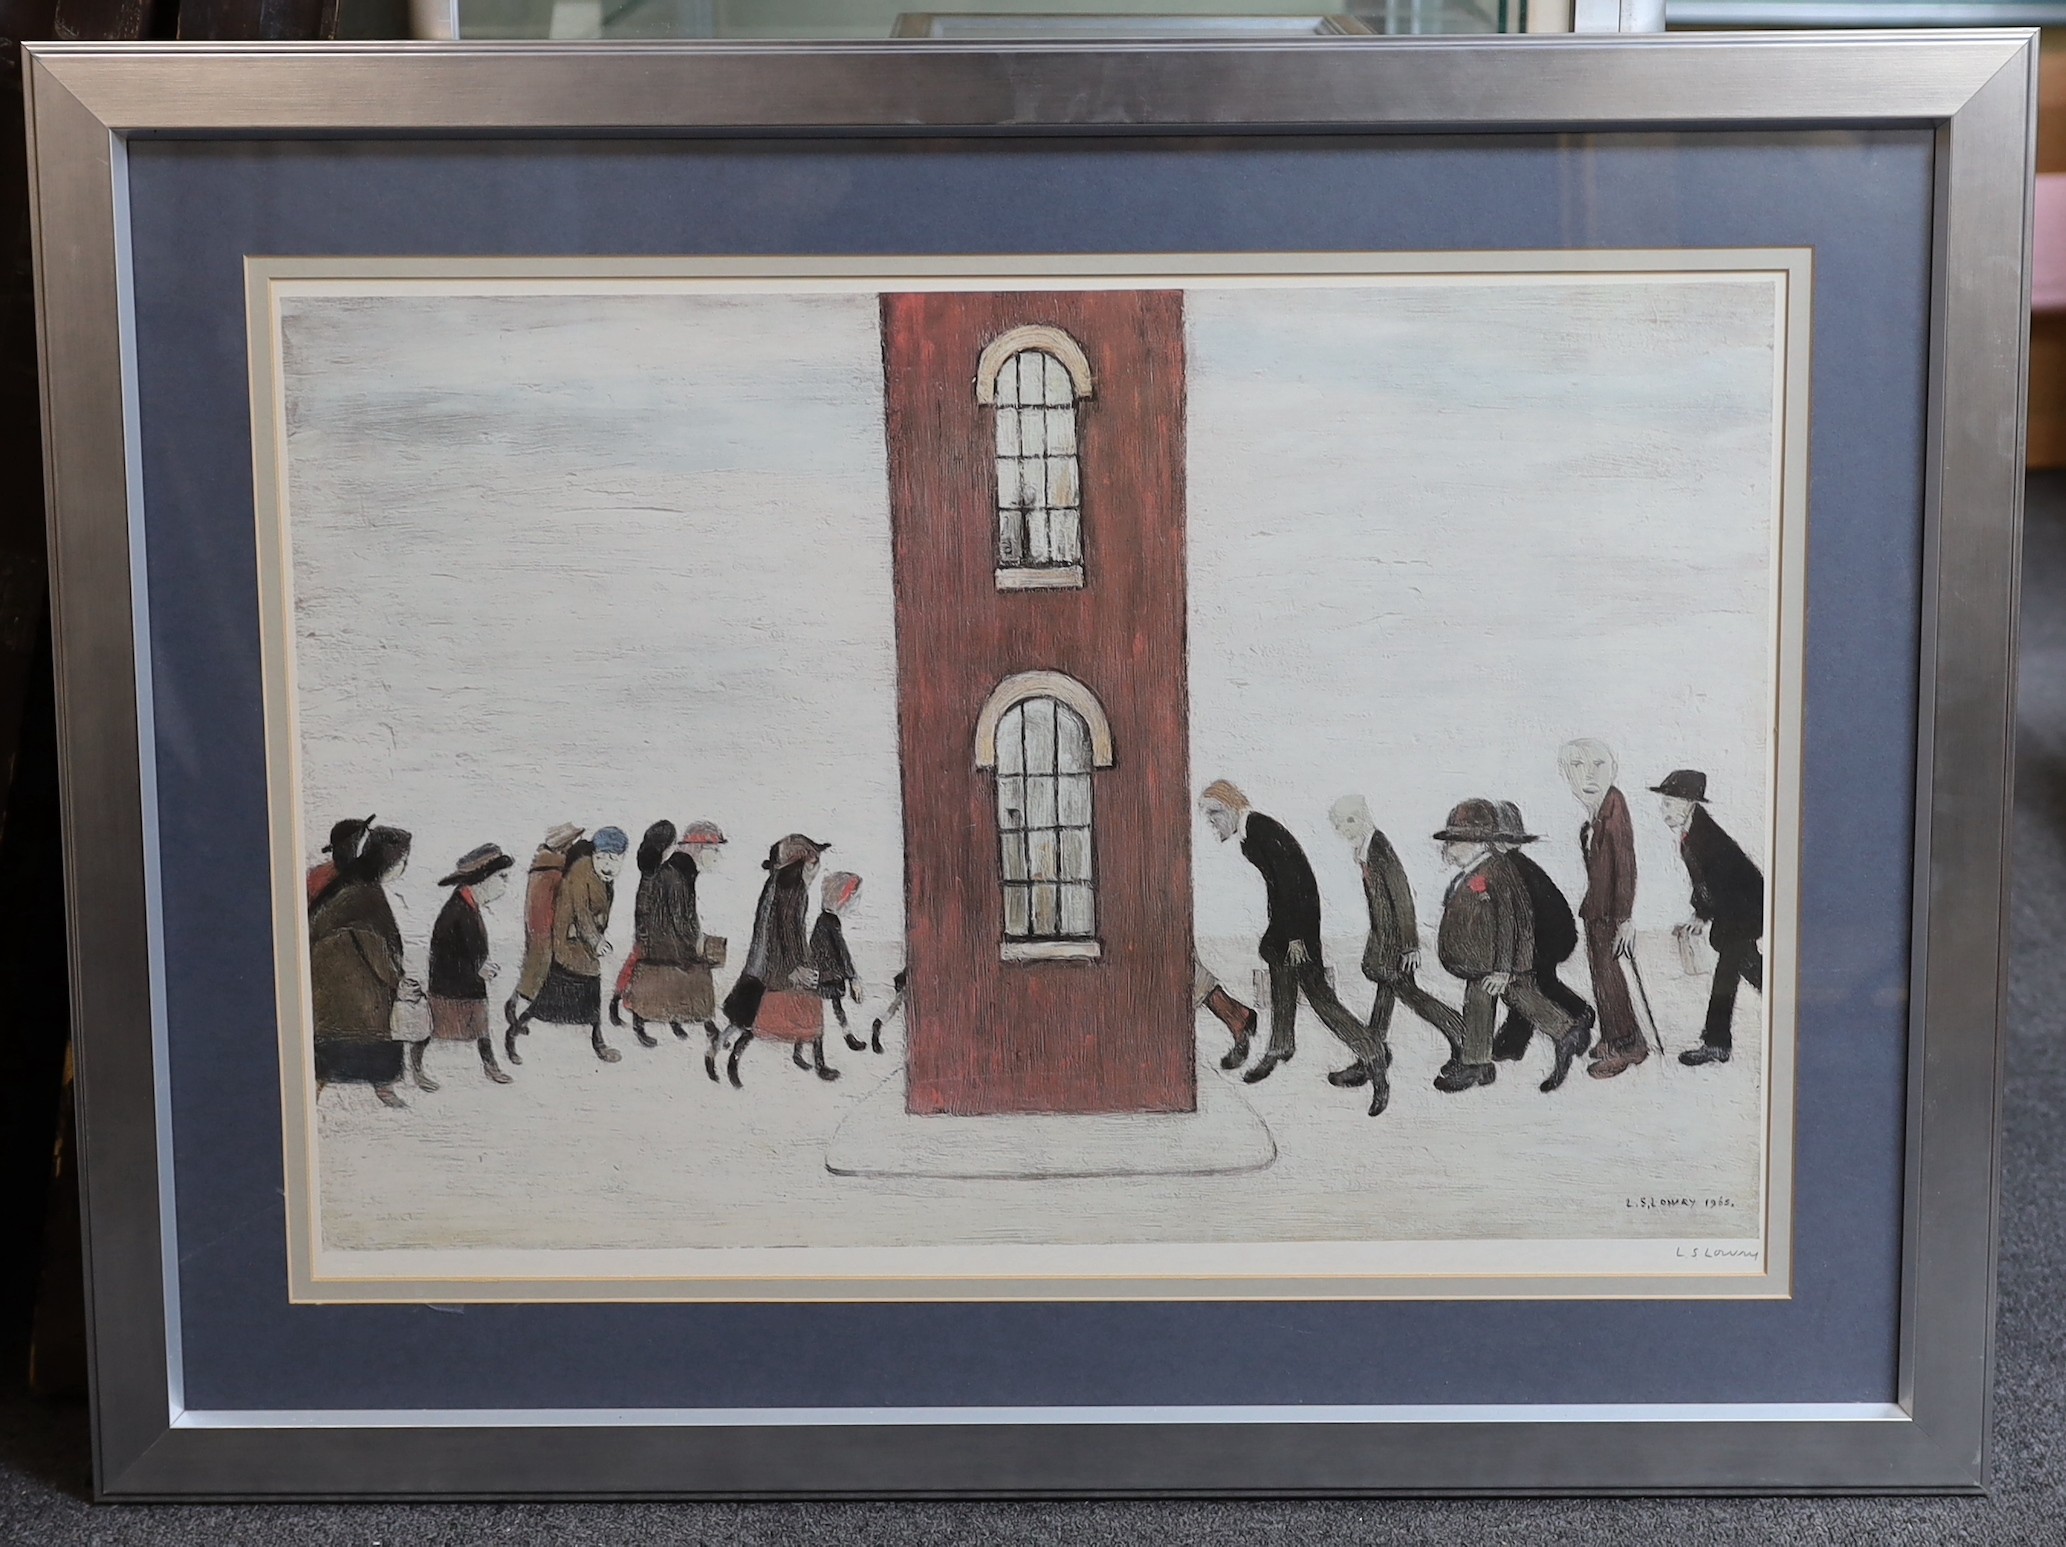 Lawrence Stephen Lowry R.A.(1887-1976), Meeting Point, lithograph, 49 x 72cm.